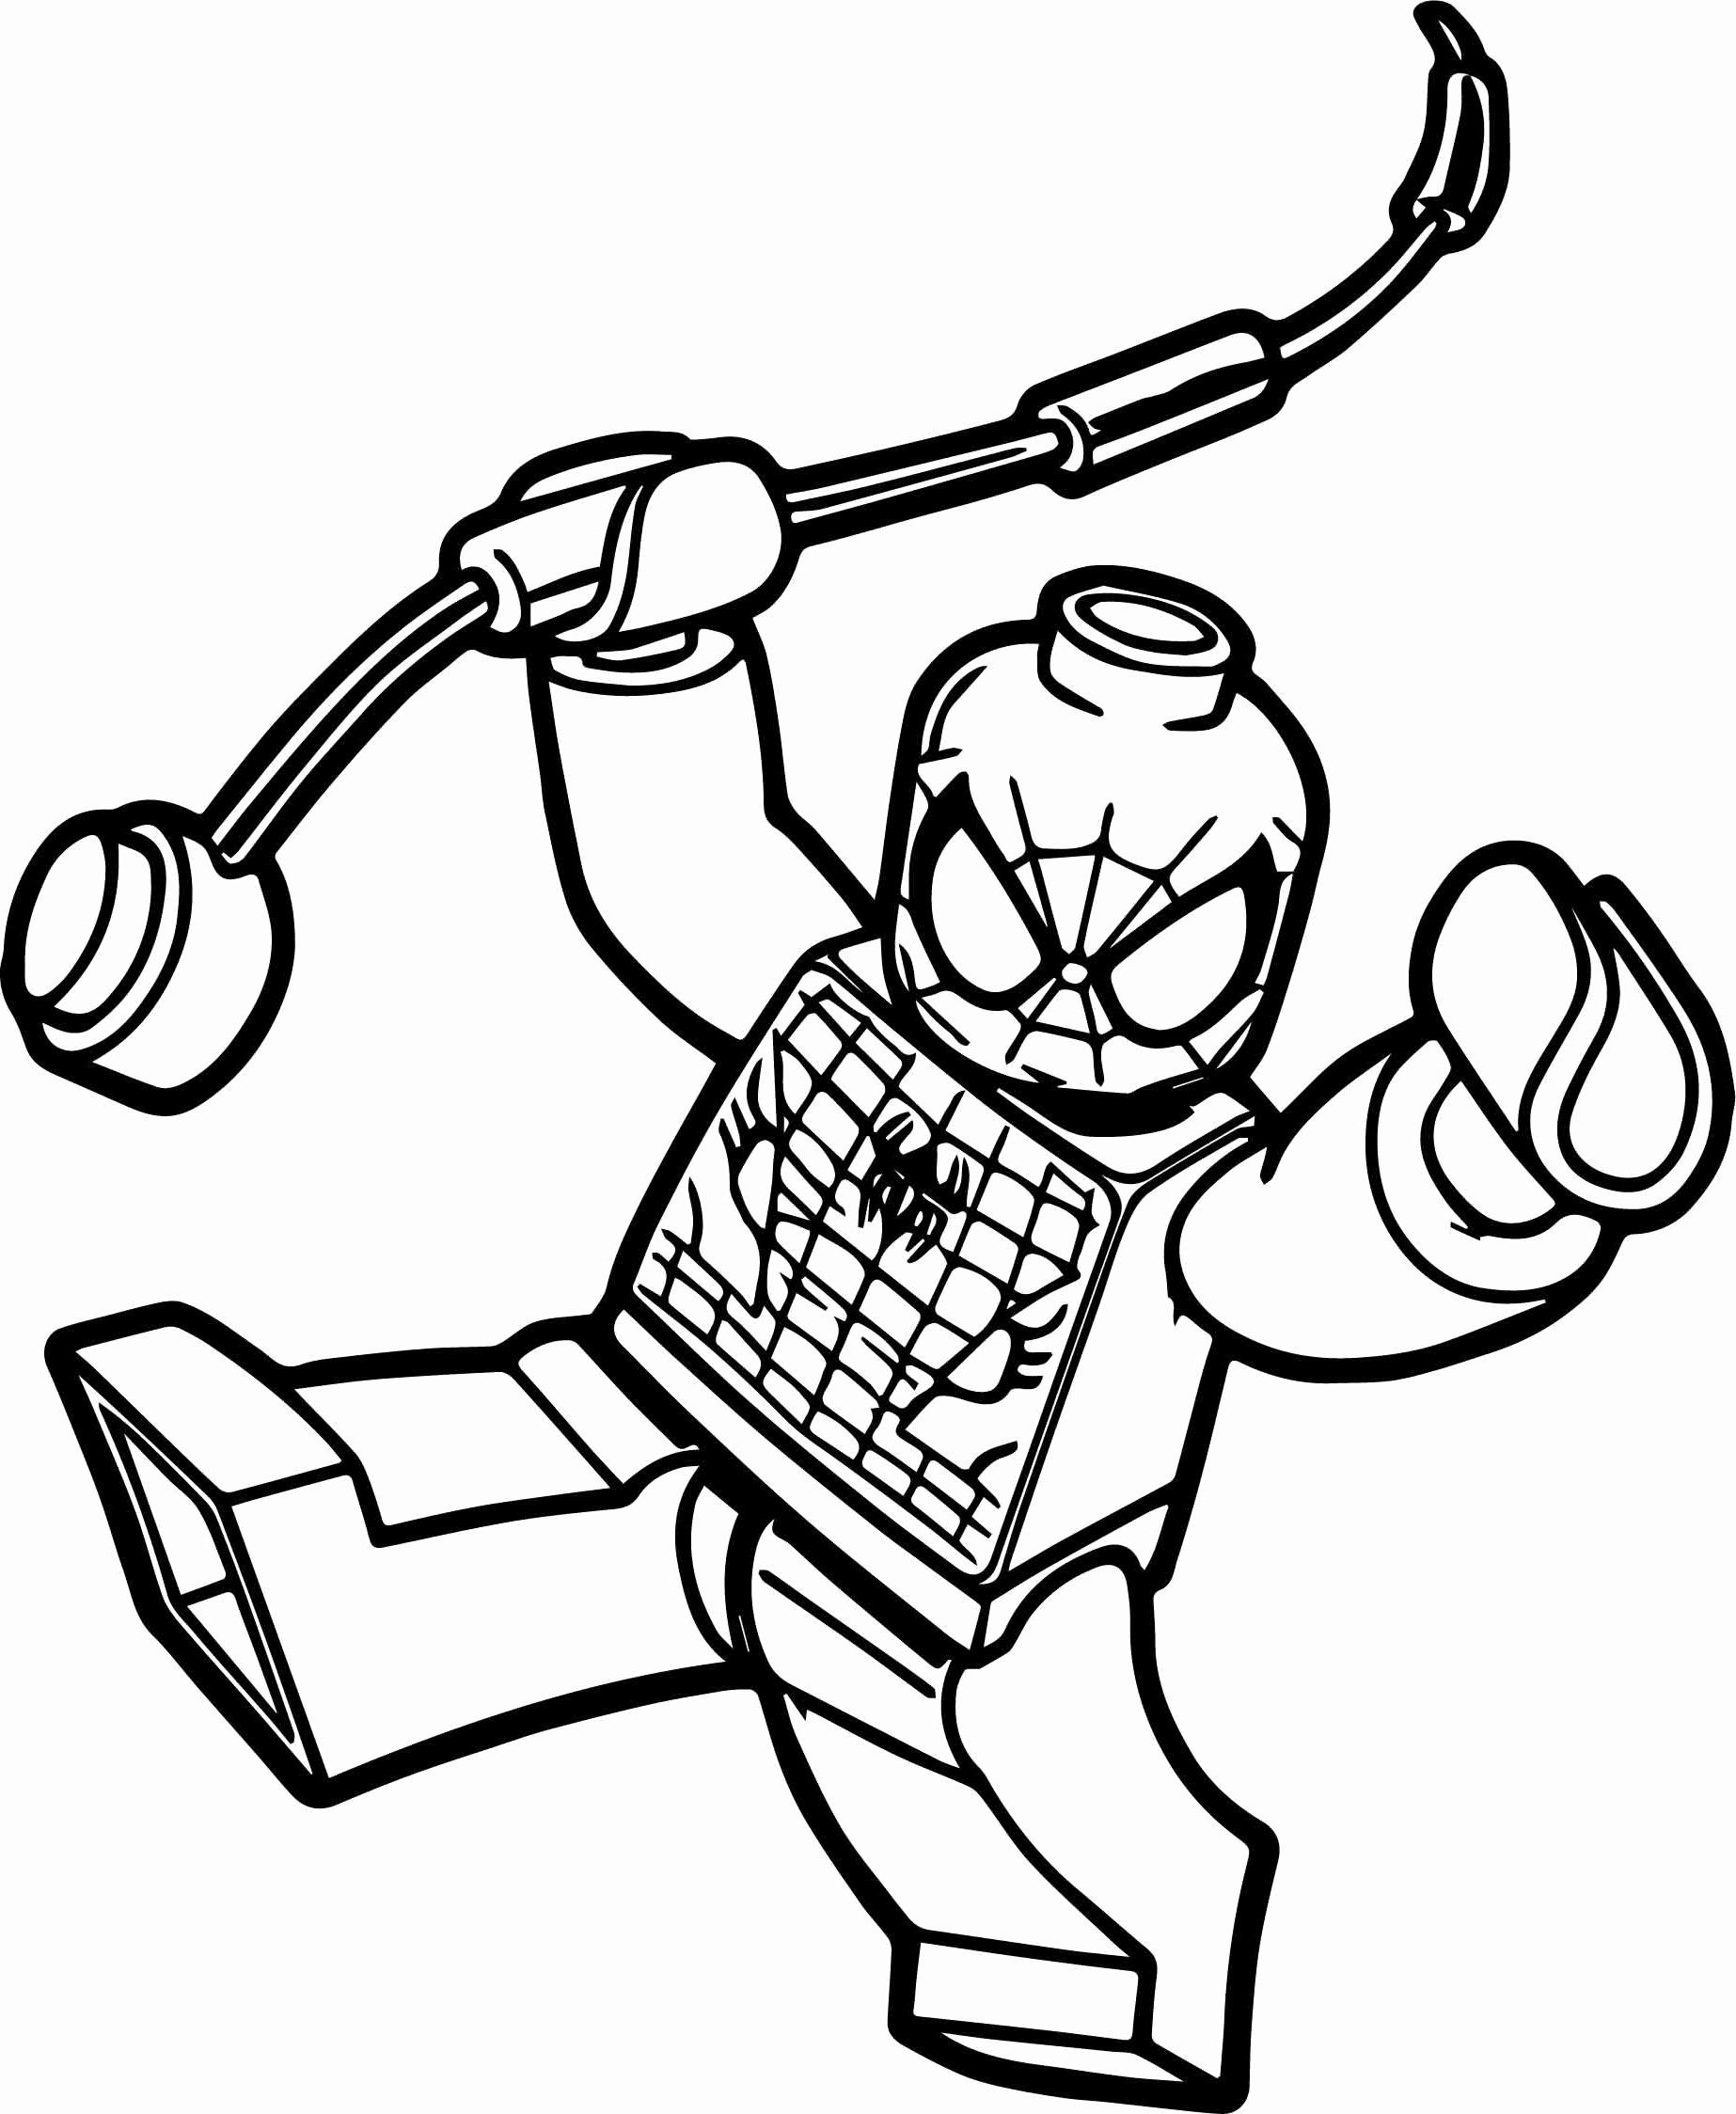 Spiderman coloring book with lego blocks to print and online